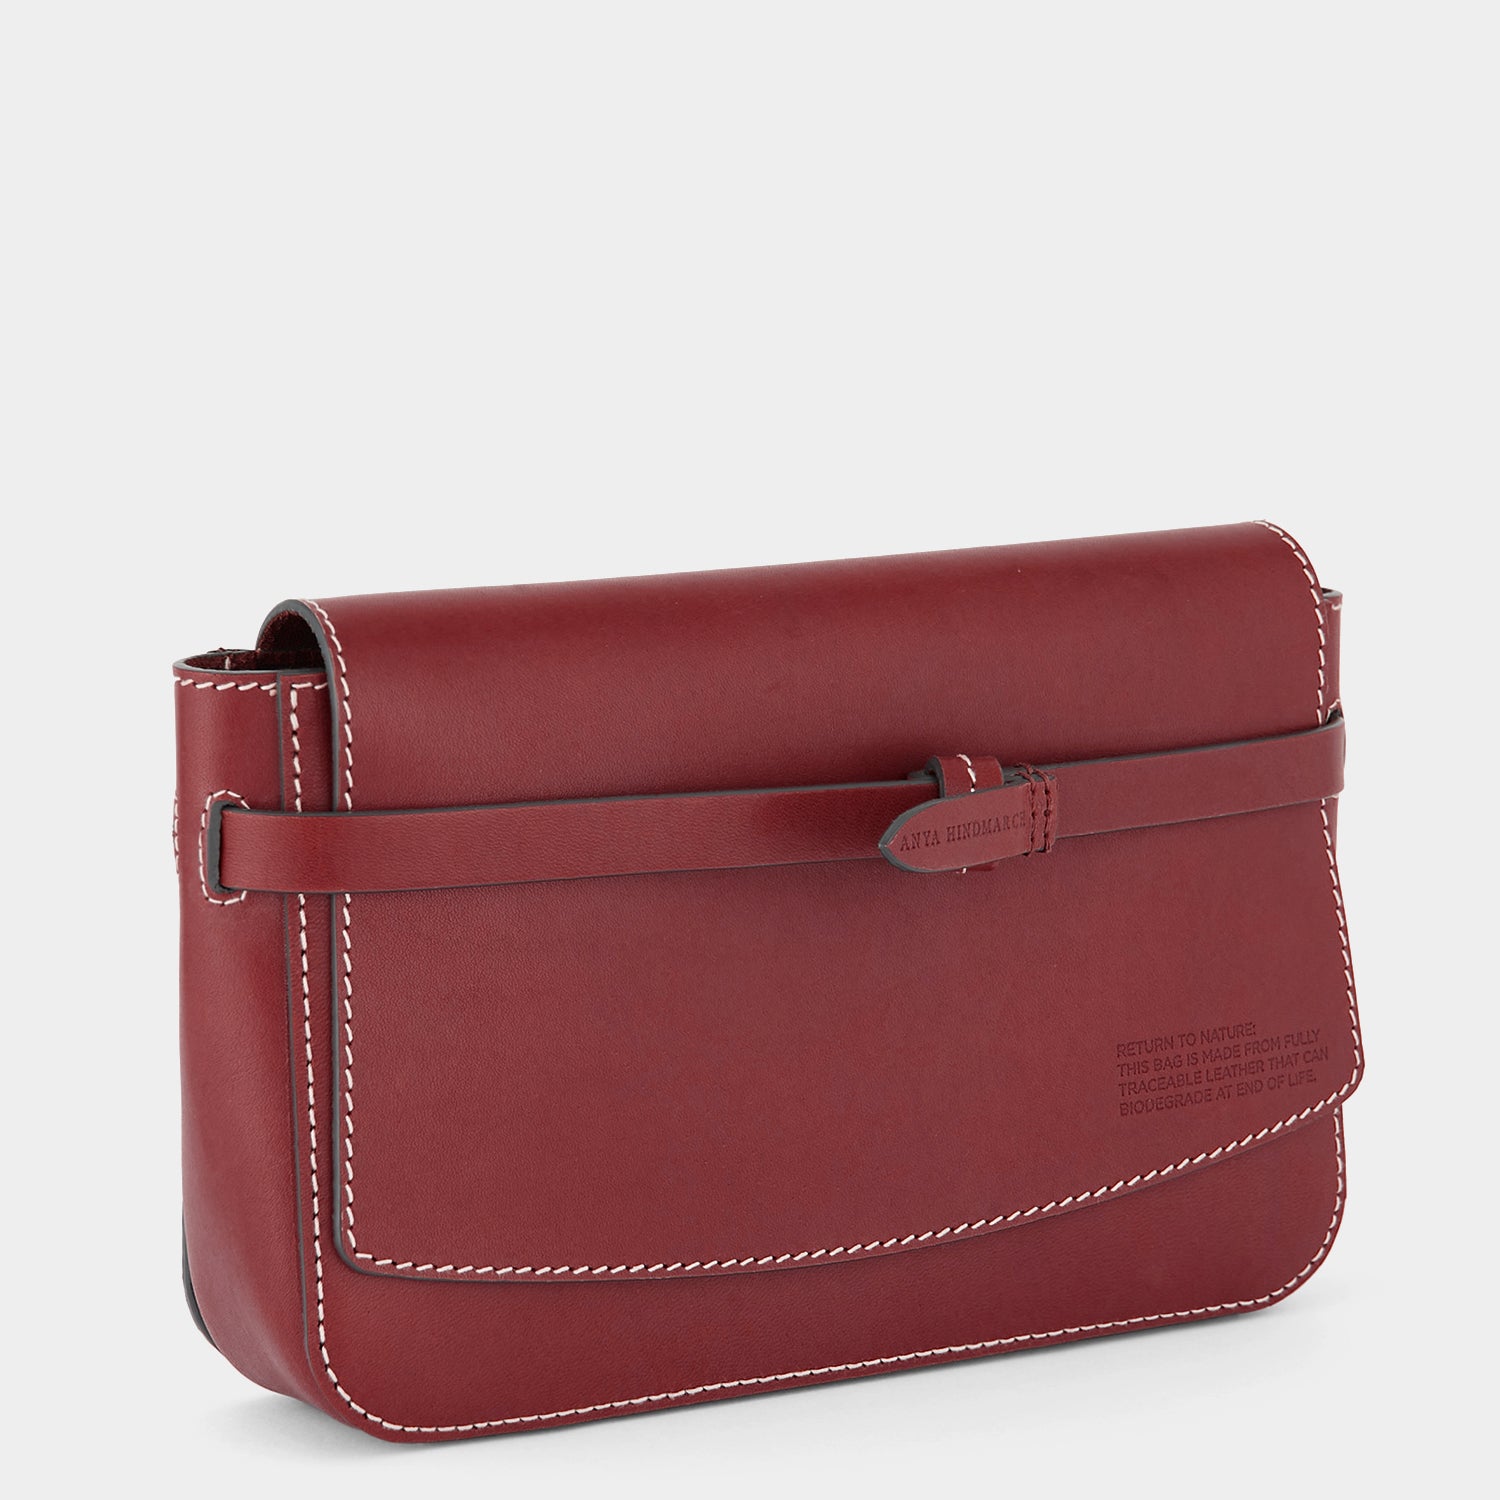 Return to Nature Clutch -

                  
                    Compostable Leather in Rosewood -
                  

                  Anya Hindmarch EU
